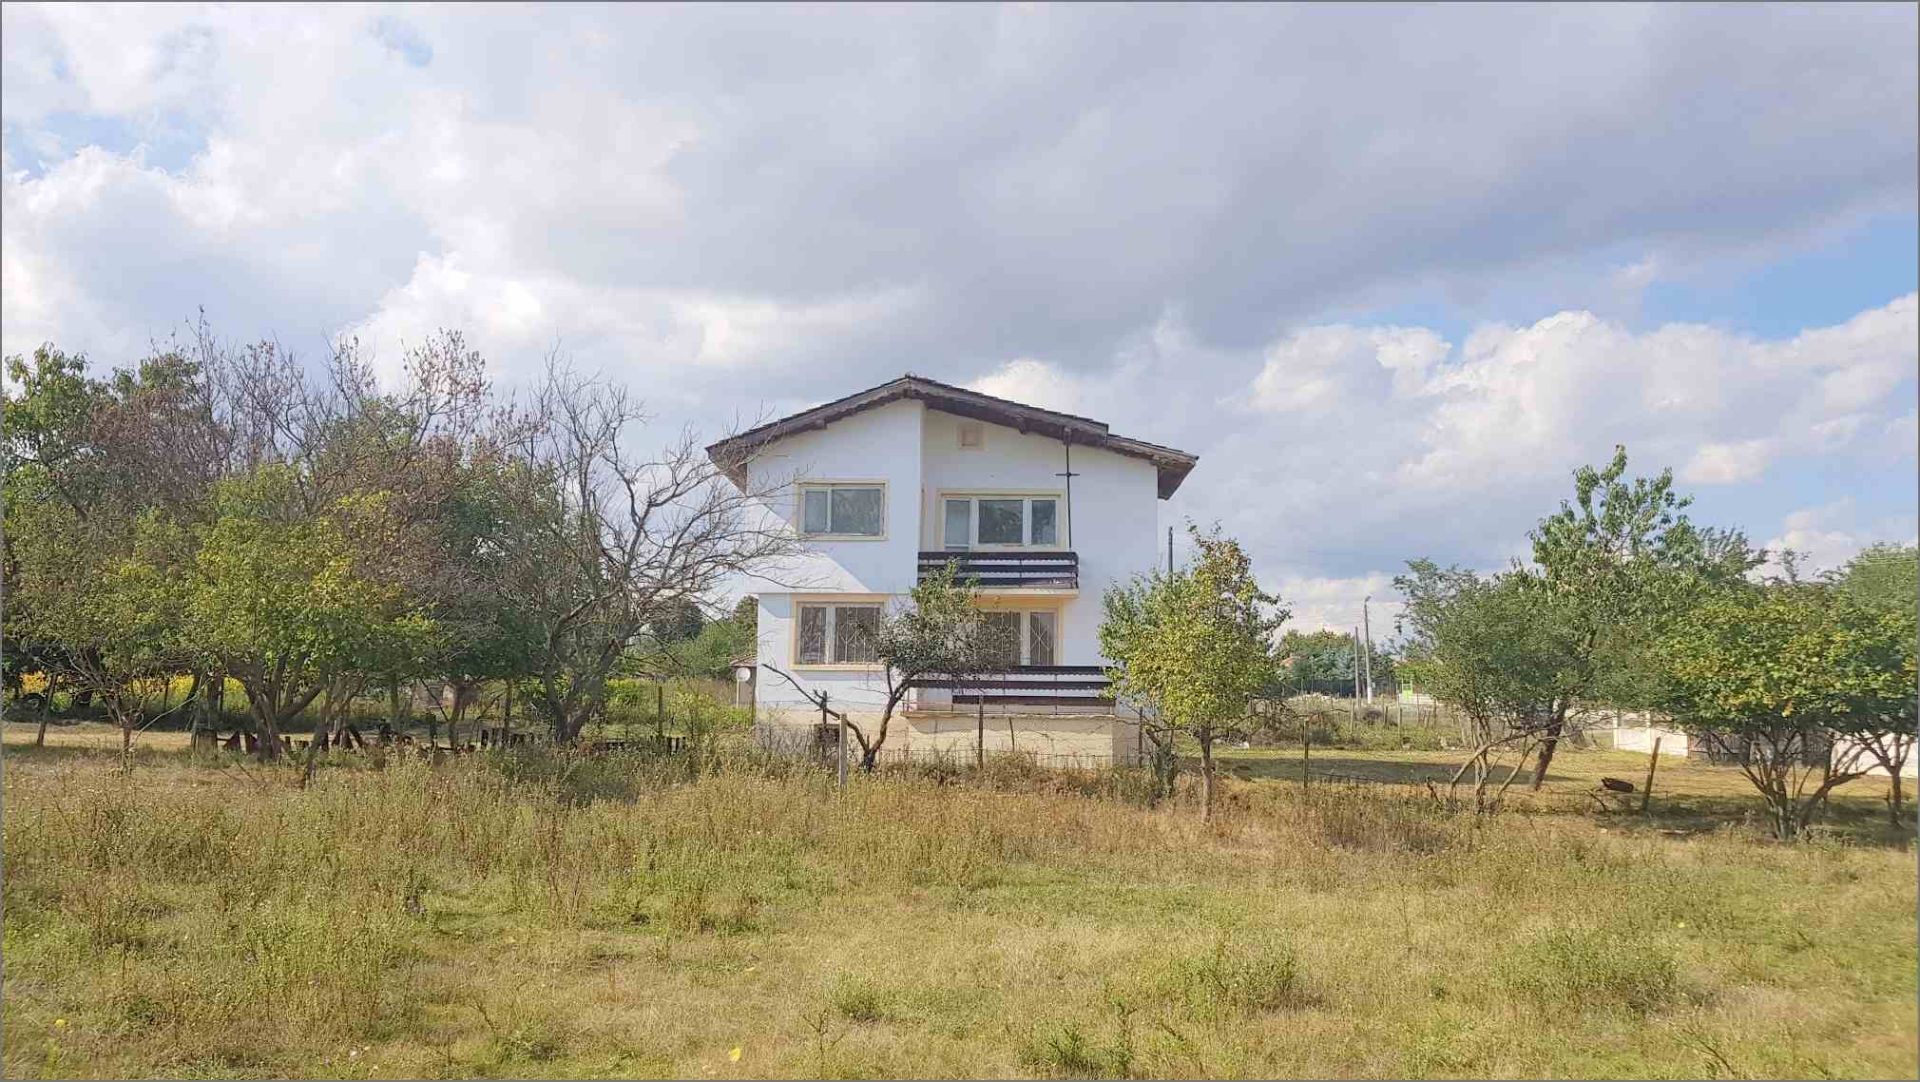 FOUR BEDROOM VILLA AND 950 SQM OF LAND NEAR THE COAST IN MALINA, BULGARIA - Image 2 of 25